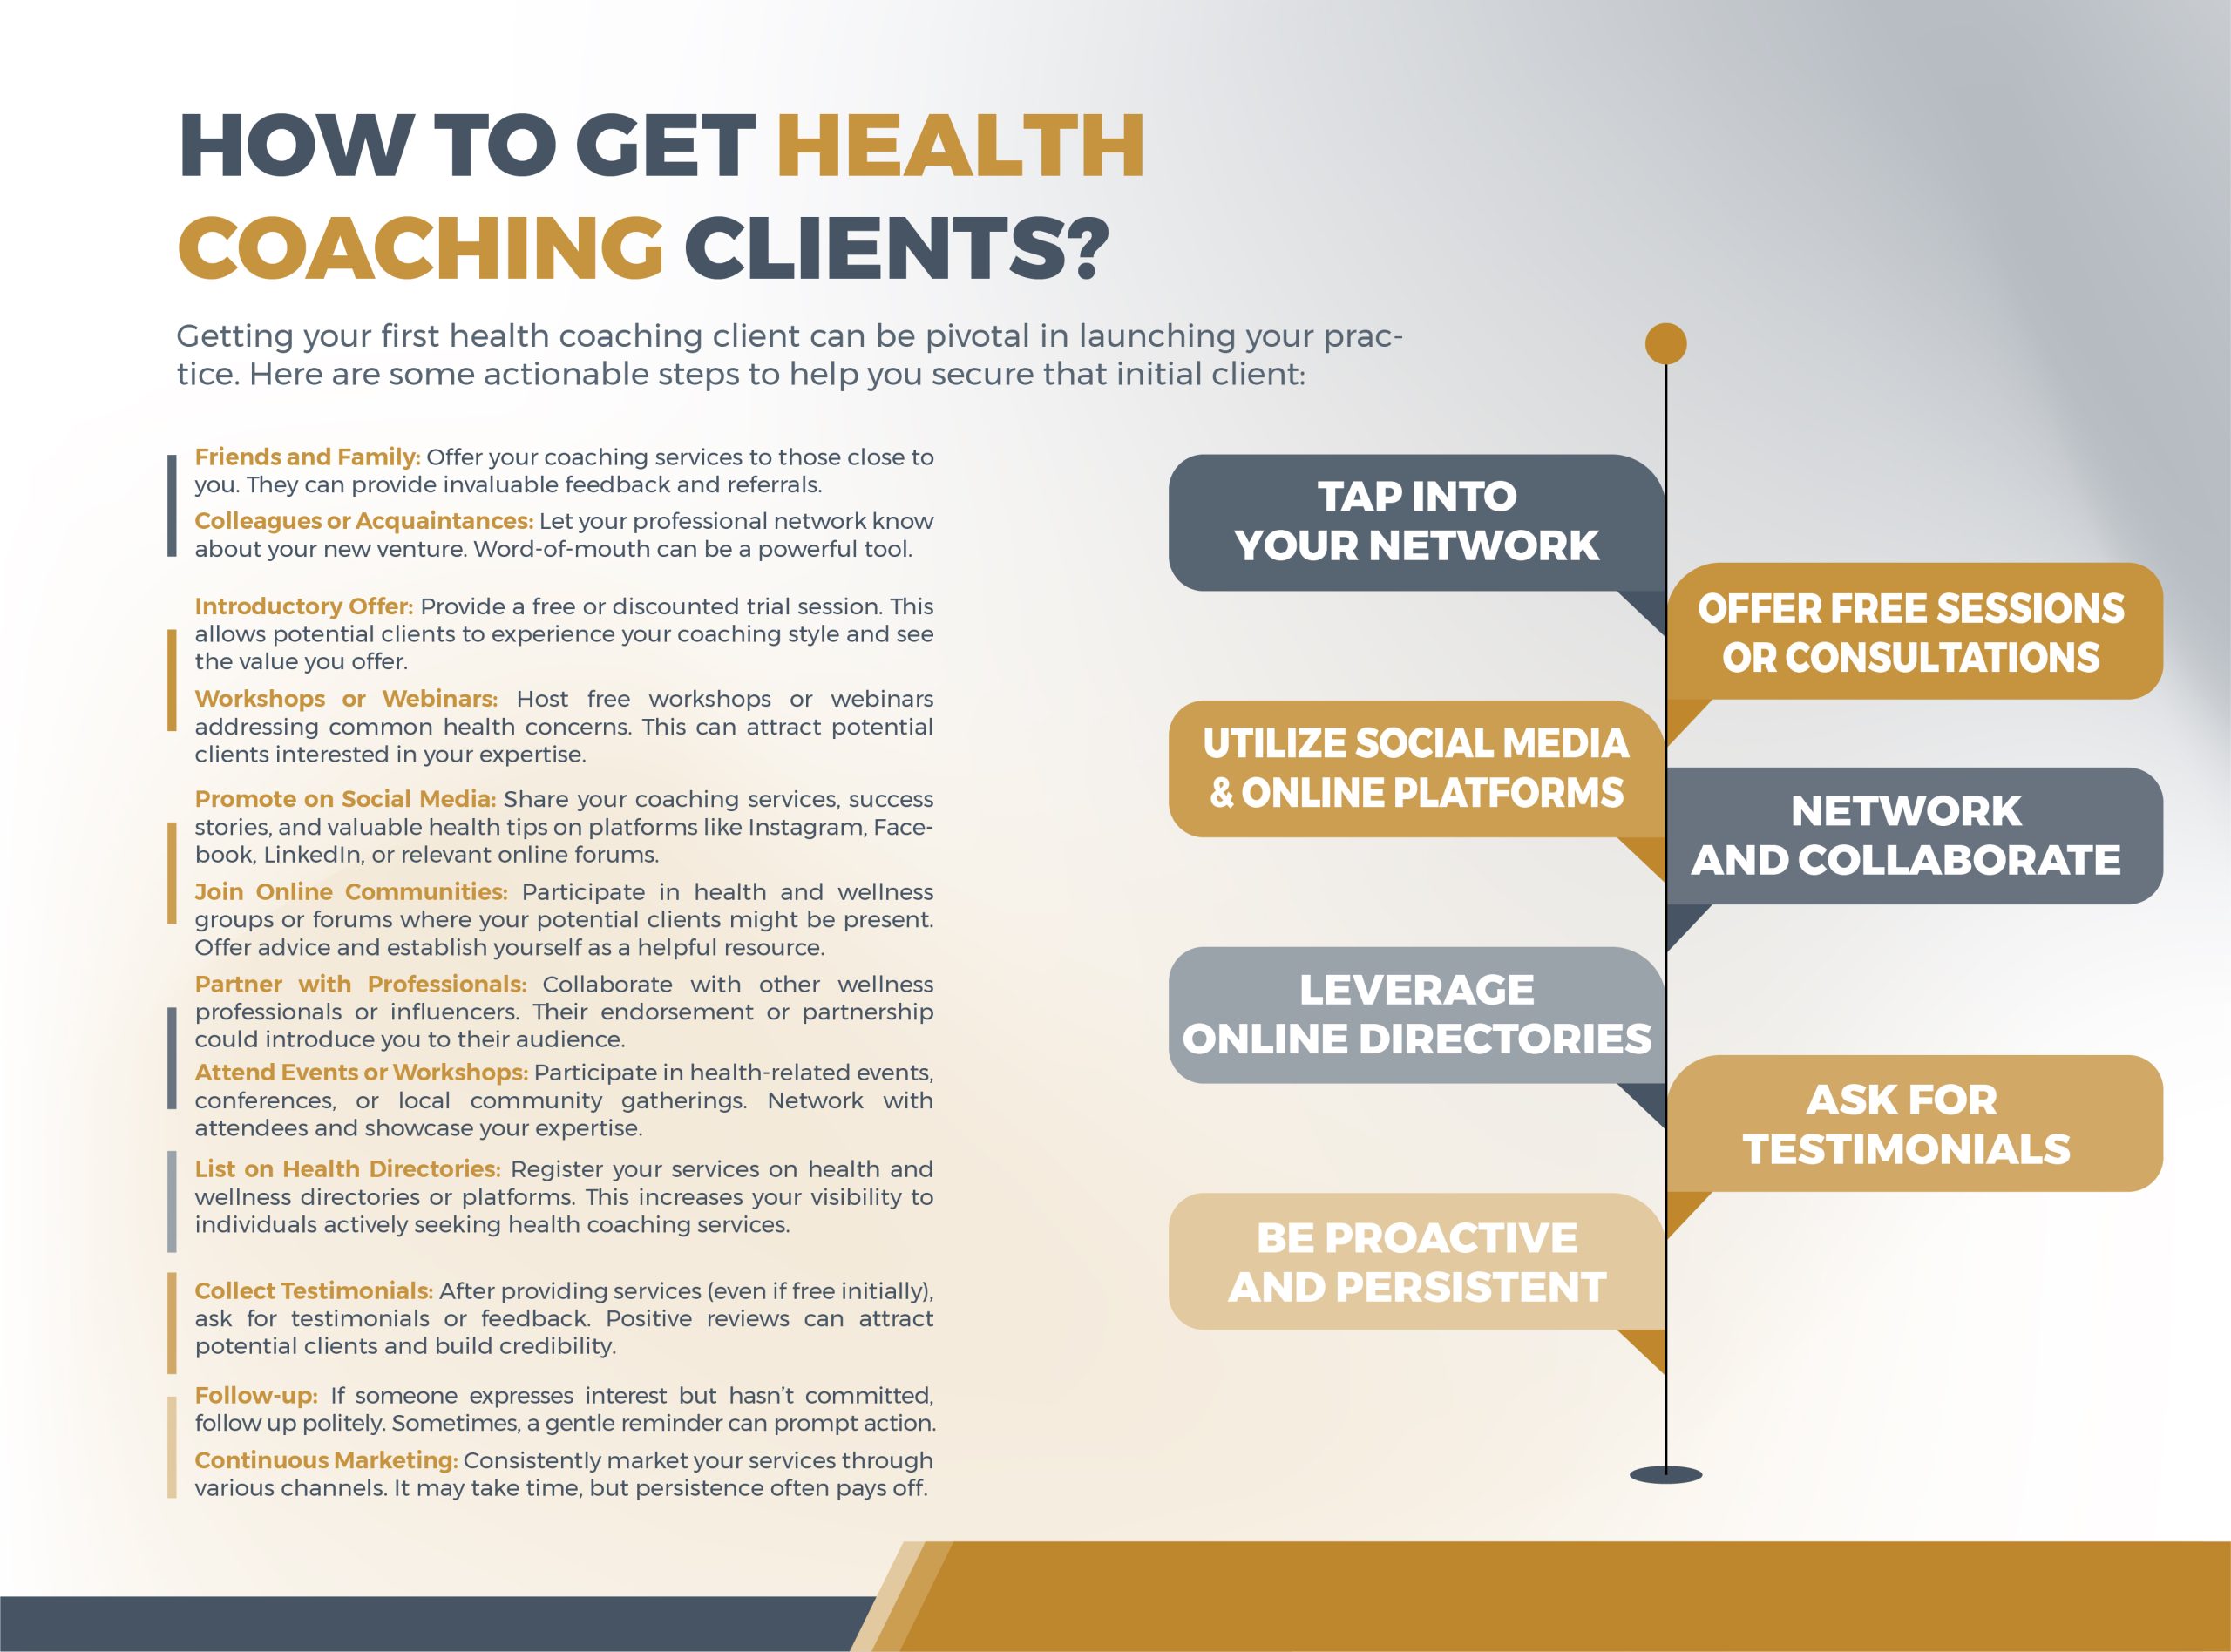 How To Get Health Coaching Clients